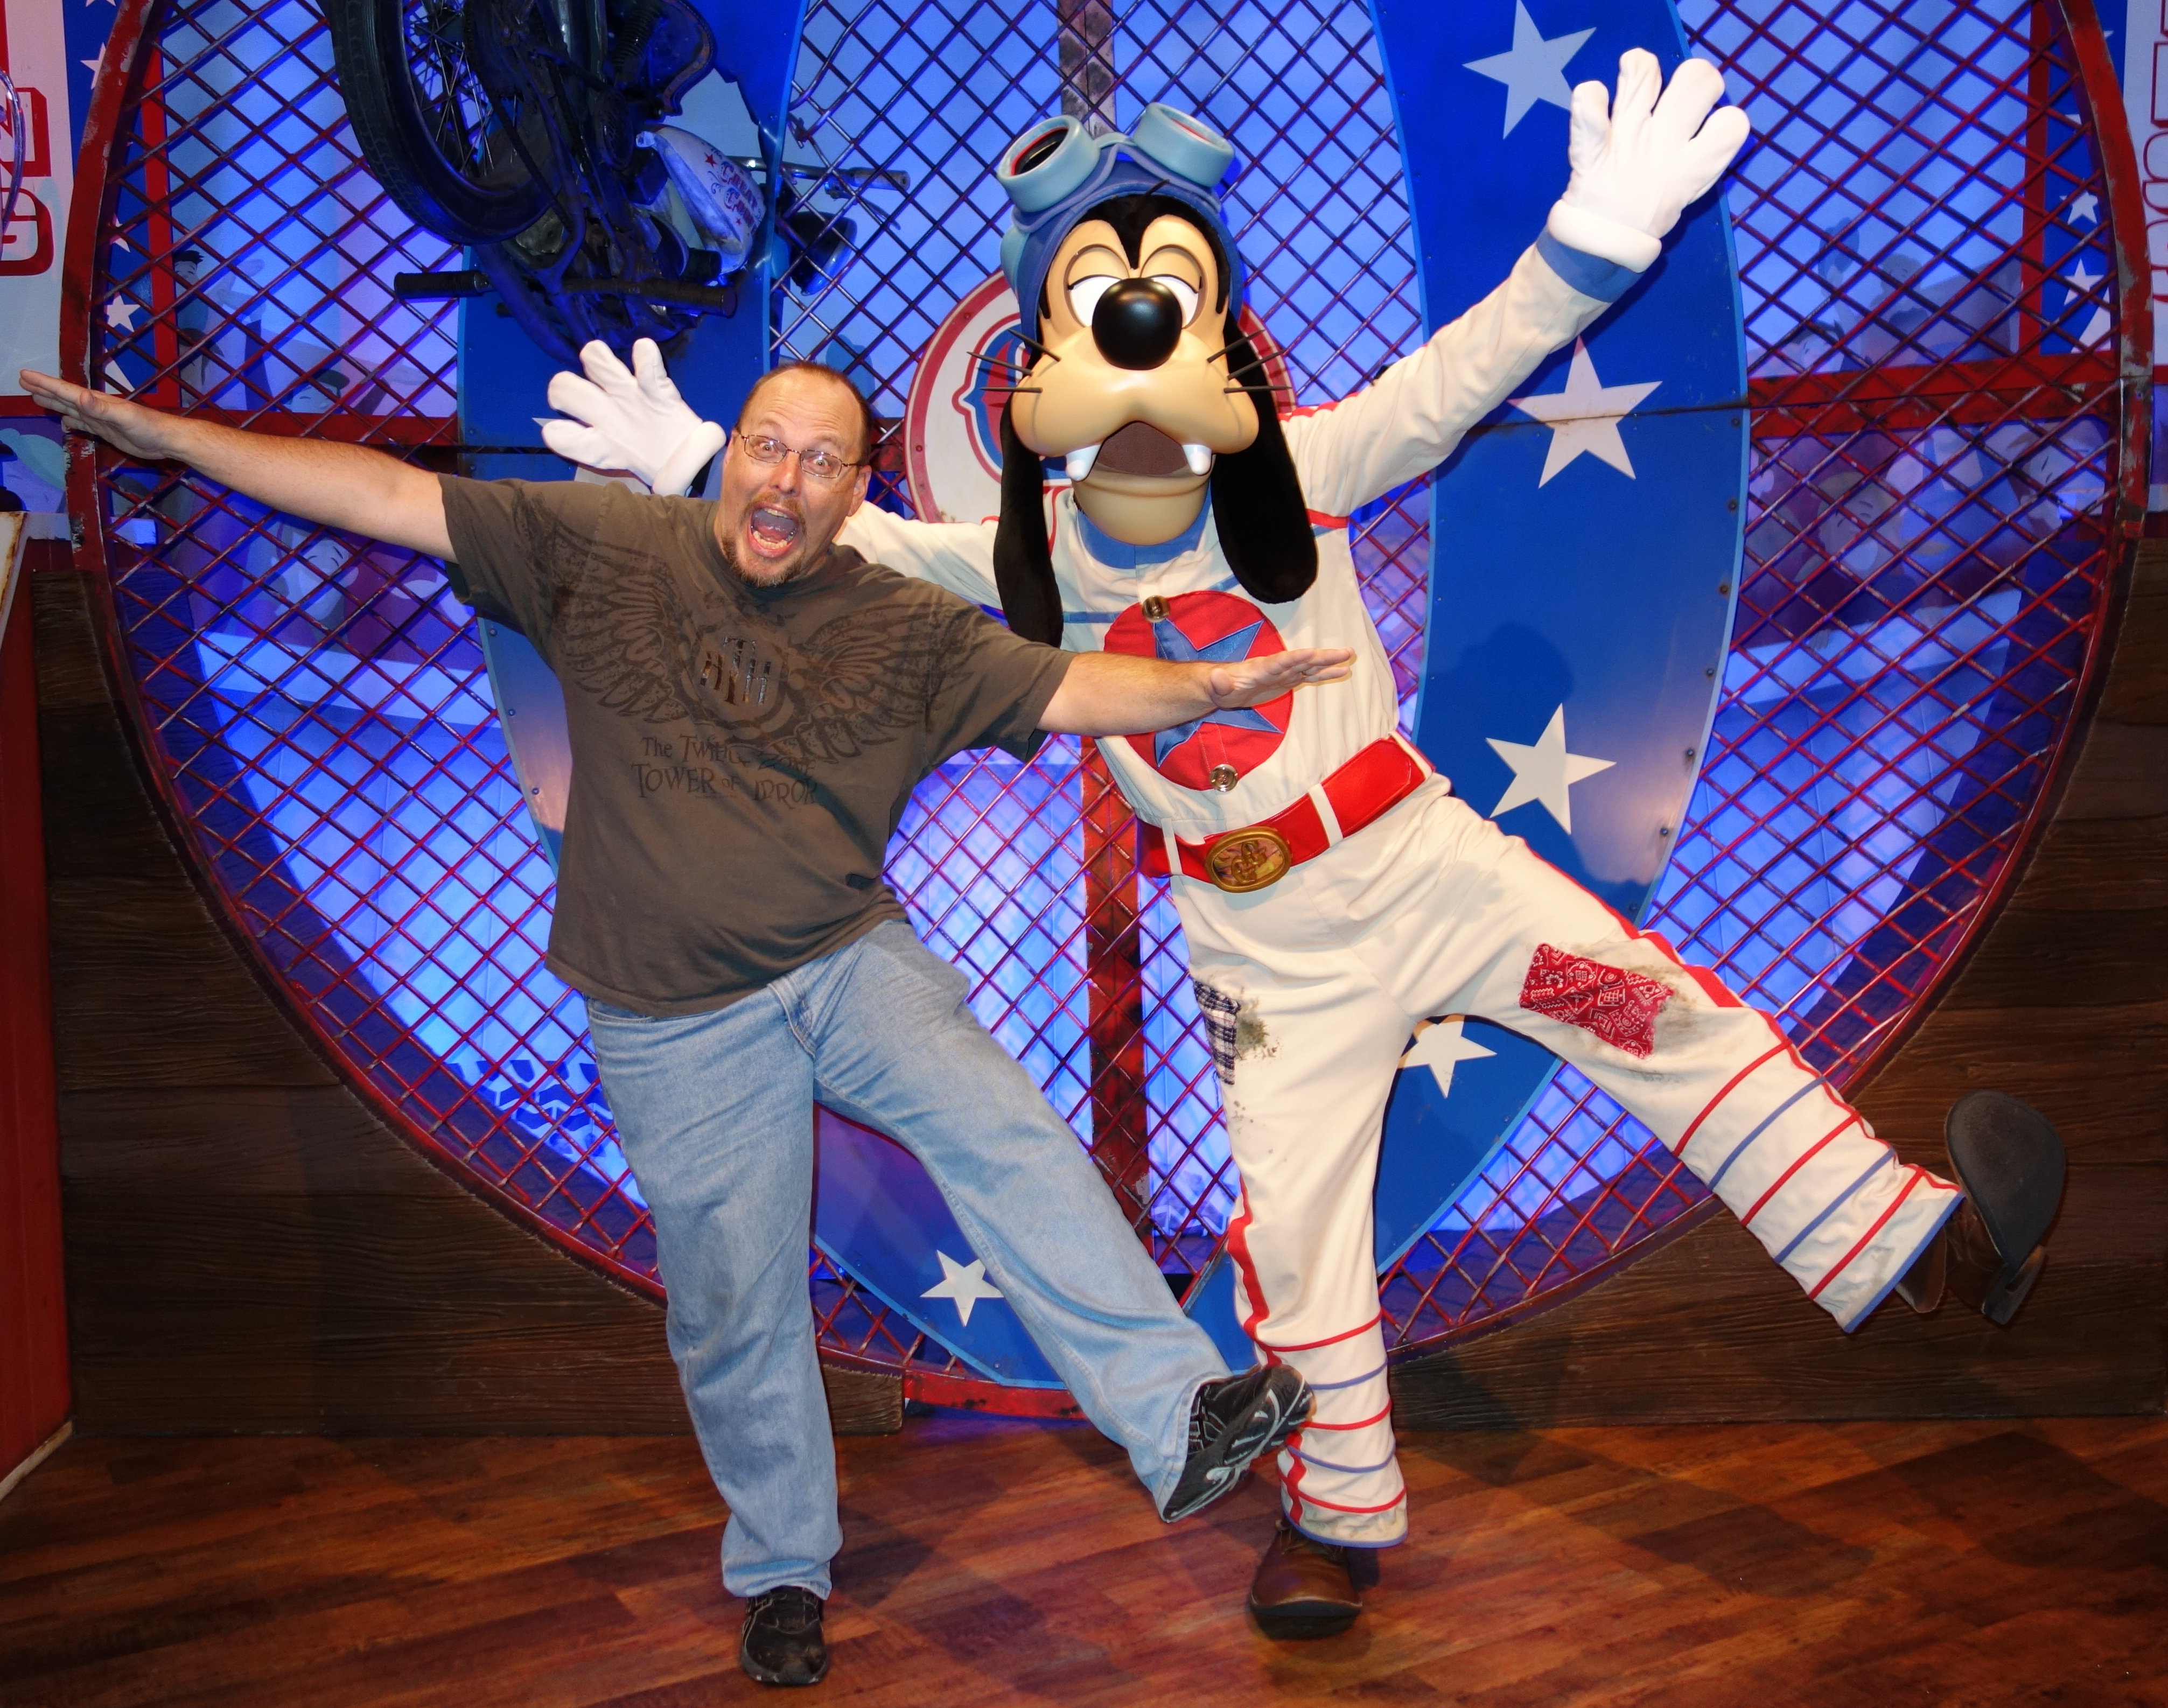 Goofy teaches me how to become a stunt performer.  We spent some time discussing all the injuries I had while doing crazy things on my bike and motorcycle as a kid.  Goofy looks about as good with the motorcycle as I was.